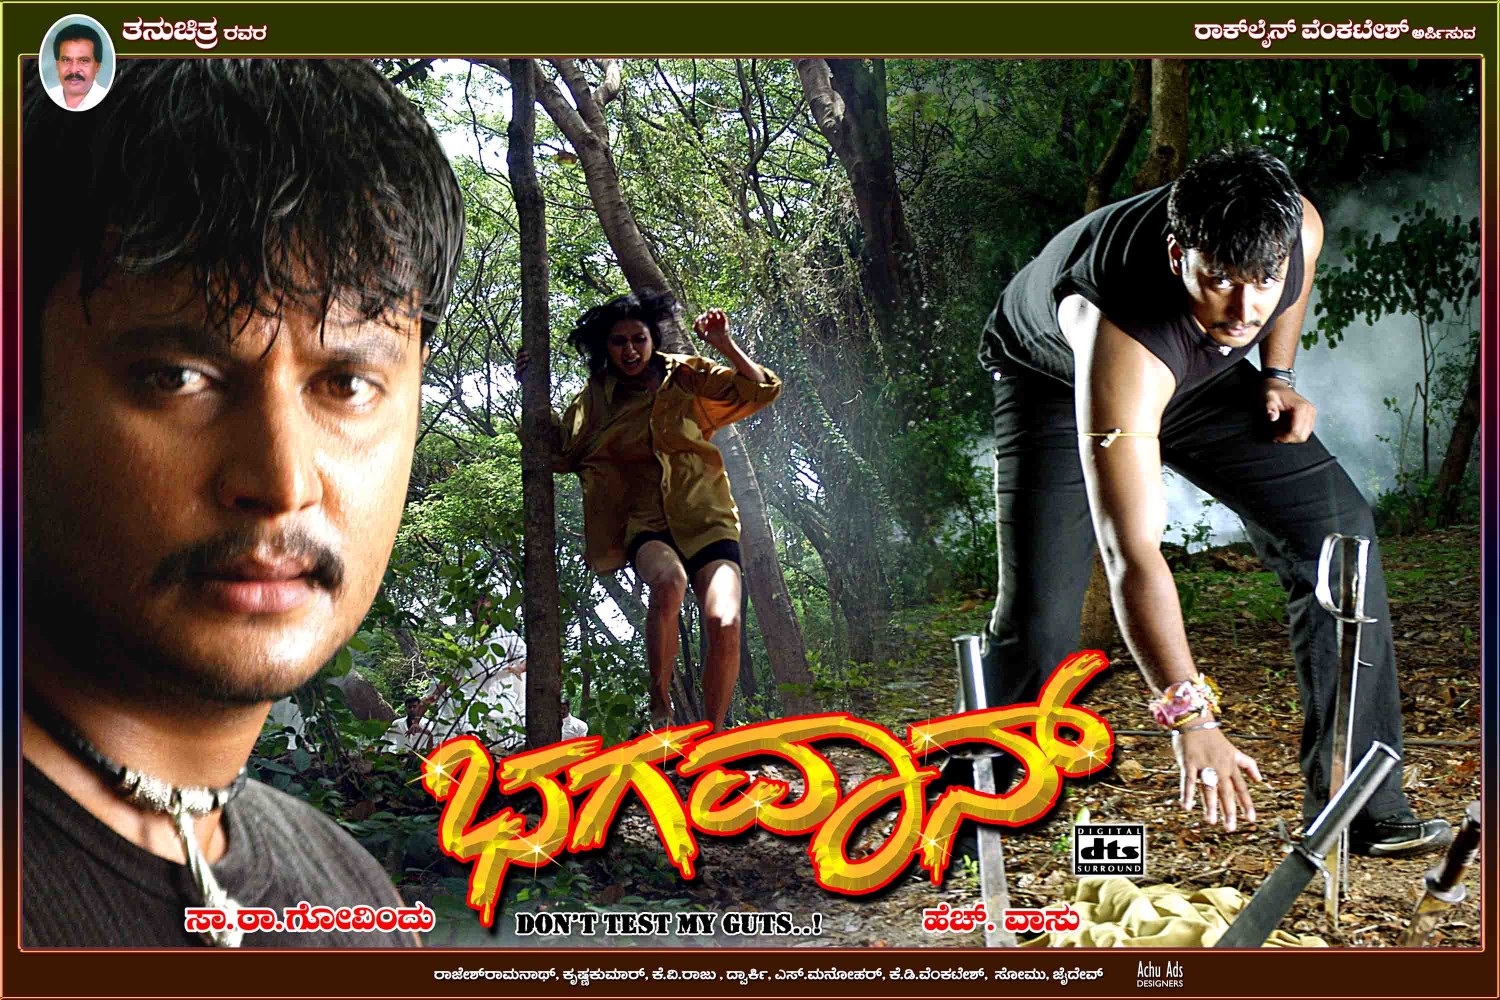 Extra Large Movie Poster Image for Bhagavan (#3 of 4)